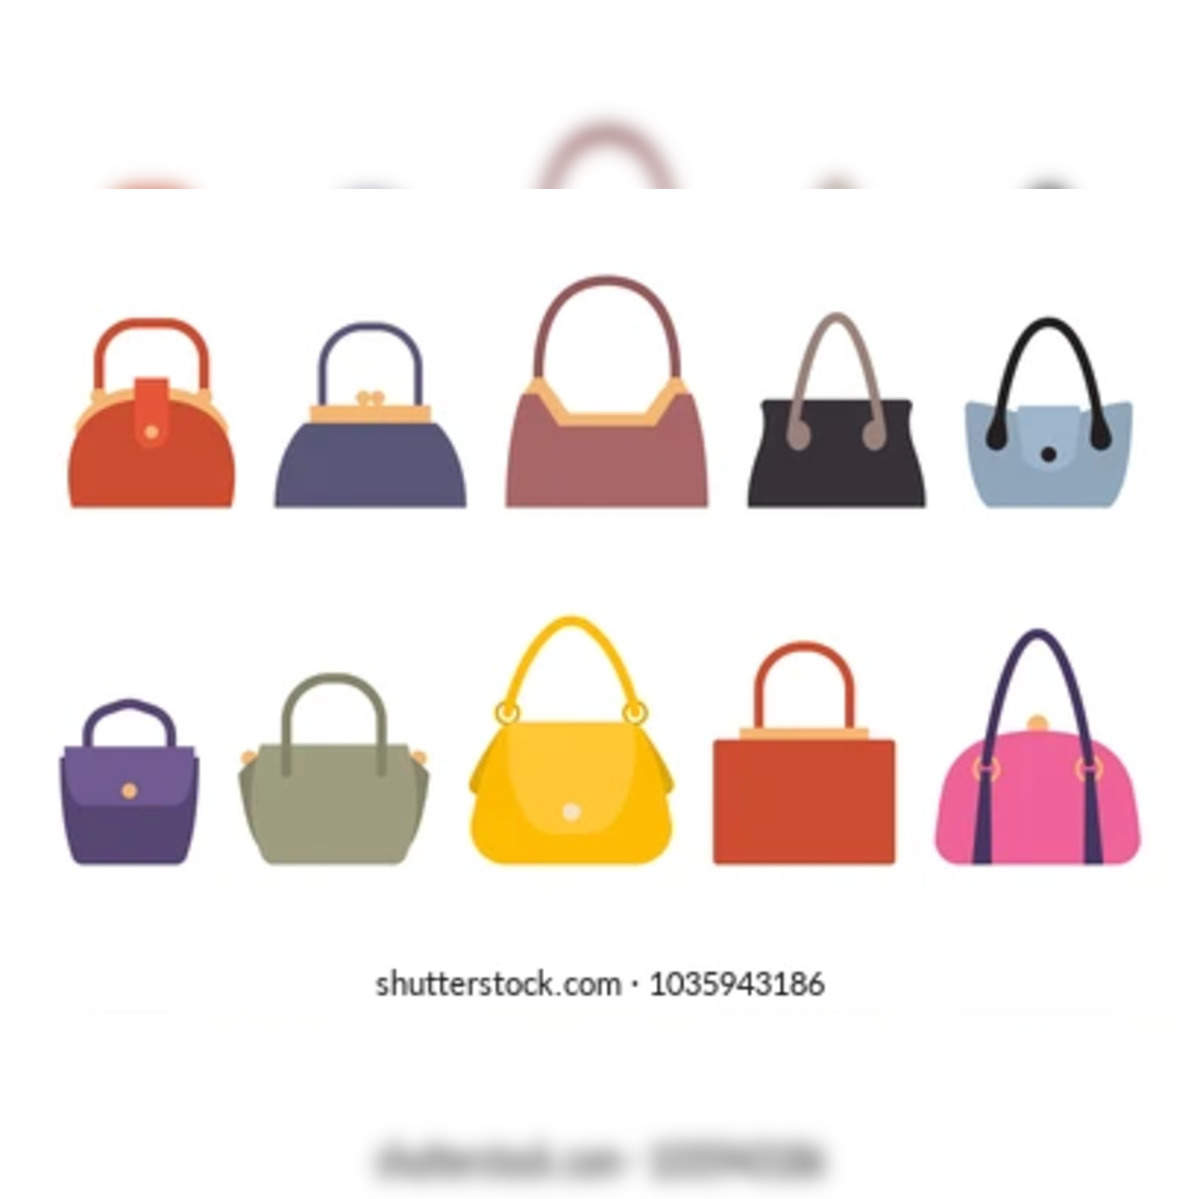 Woman bag icon, outline style - stock vector 3869511 | Crushpixel